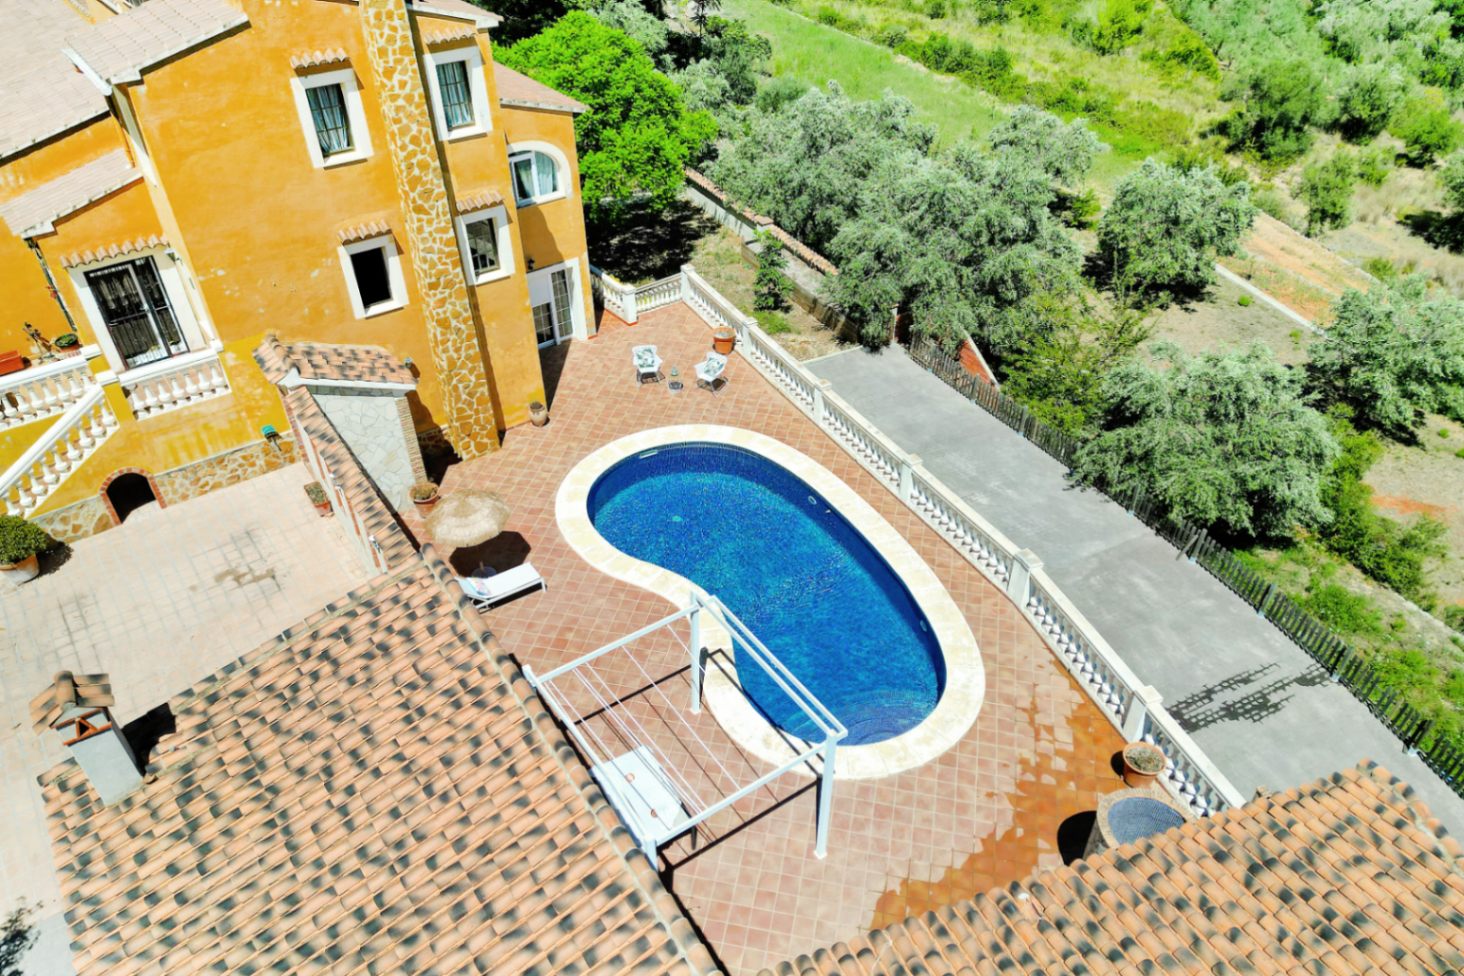 Villa with pool for sale Orba